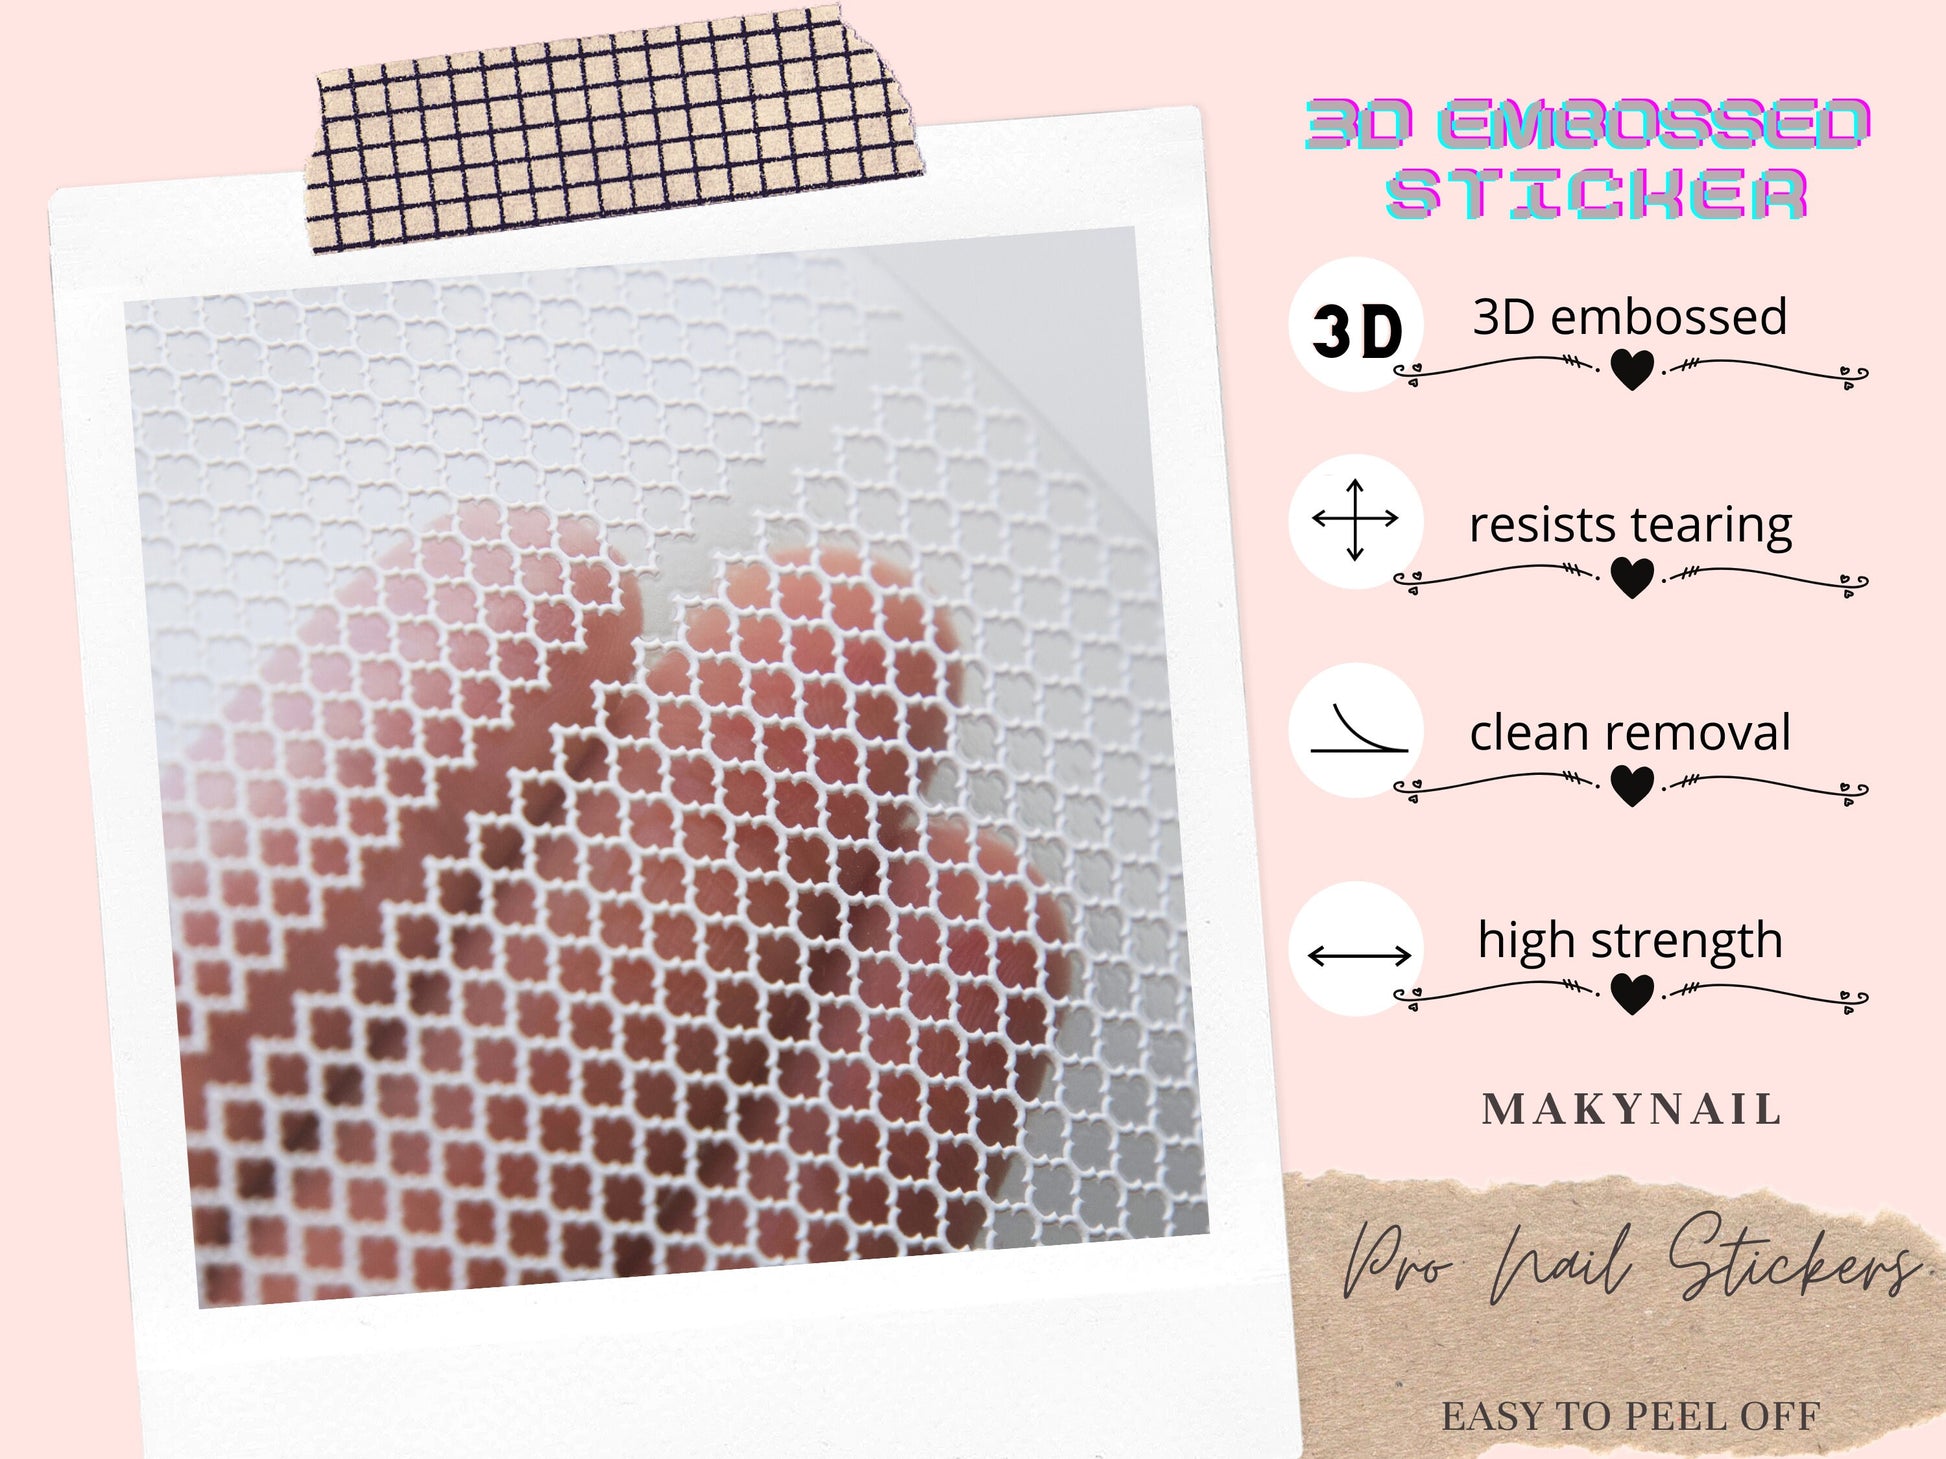 Plaid Pattern Nail Art Sticker/ 3D Embossed Checkered Grids Peel Off Tips Stickers/ Stained and Decorative Glass pattern nail design